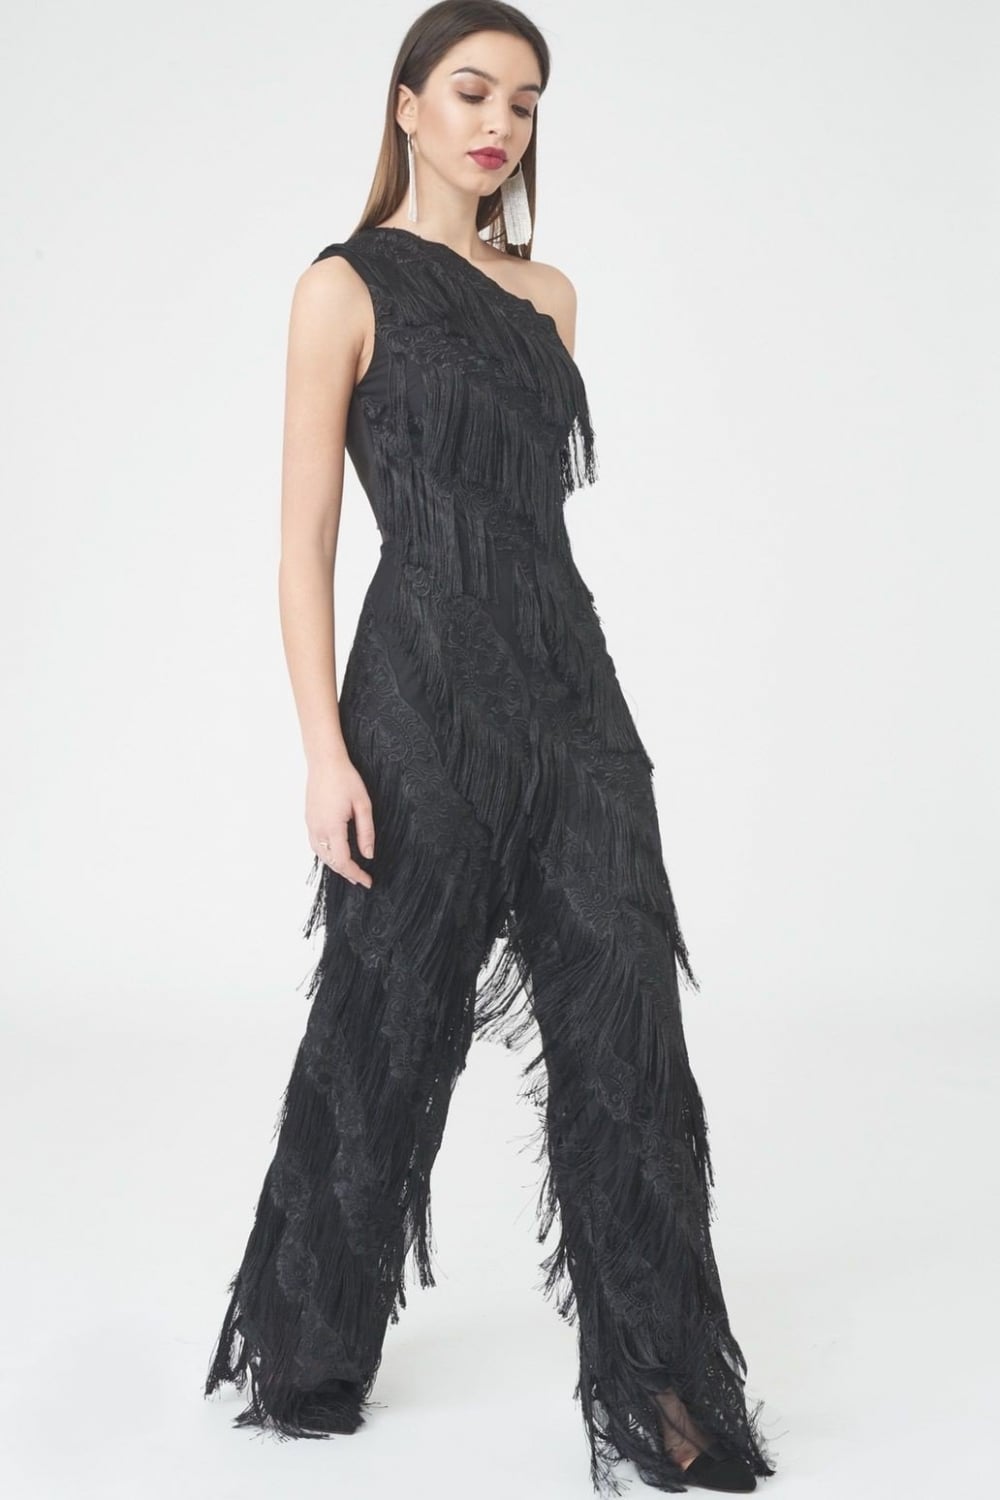 The Black Fringed Lace Jumpsuit - Full Side View